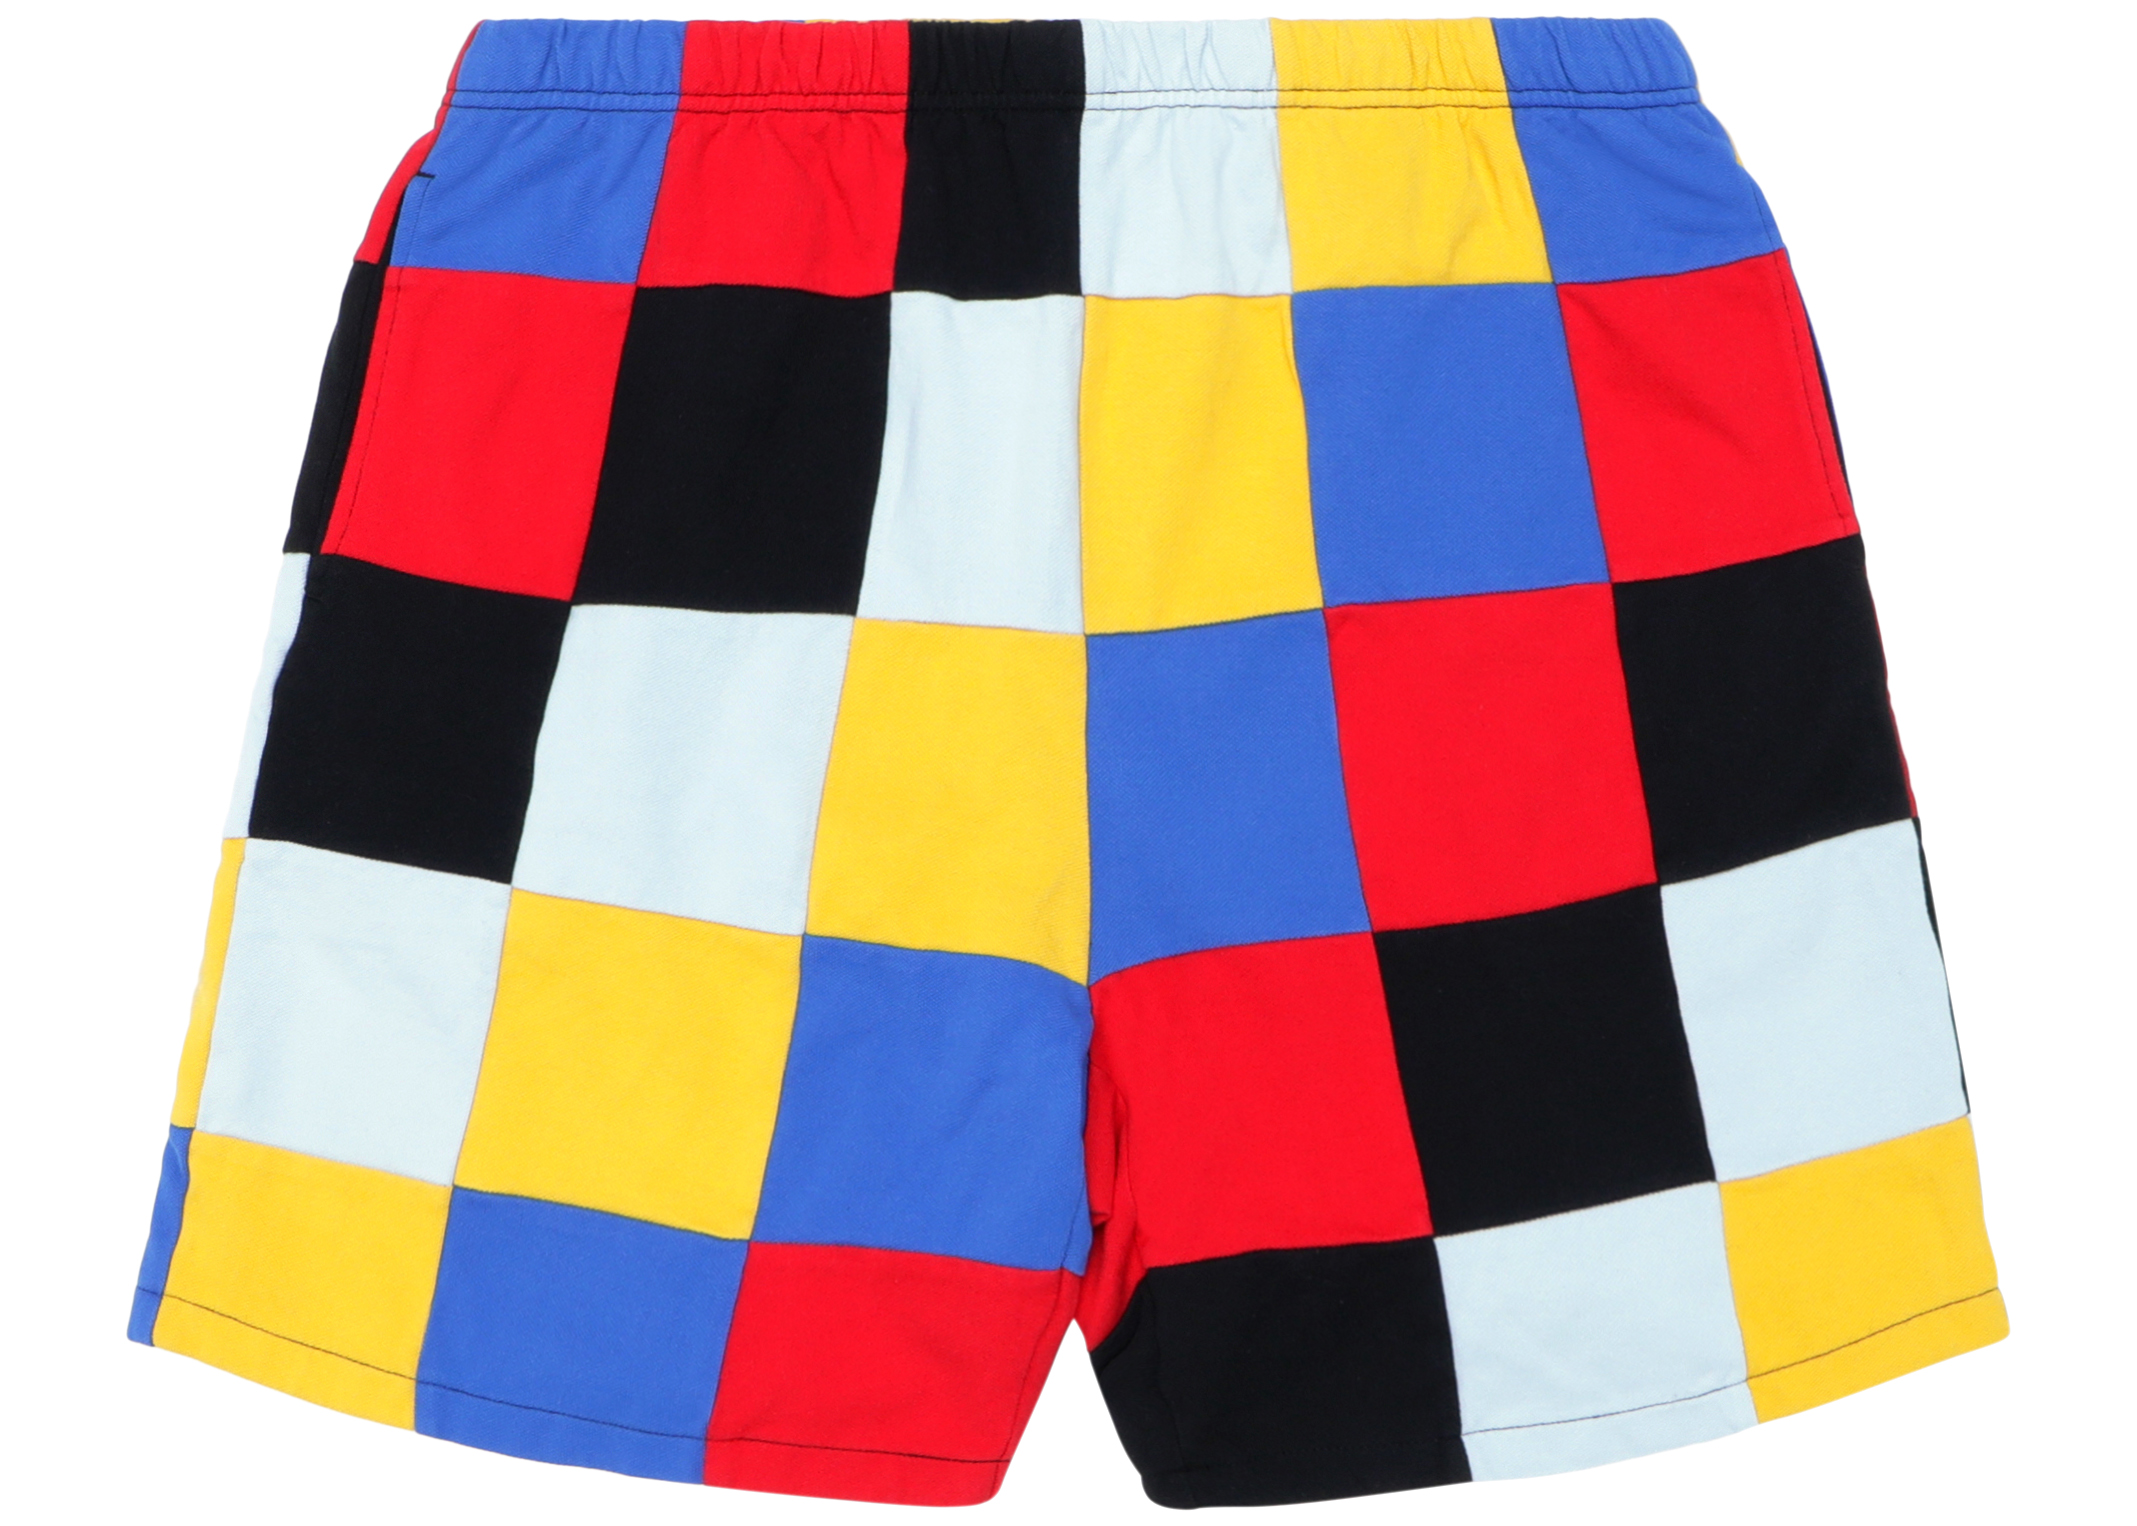 Supreme Patchwork Pique Short Red/Yellow/Blue